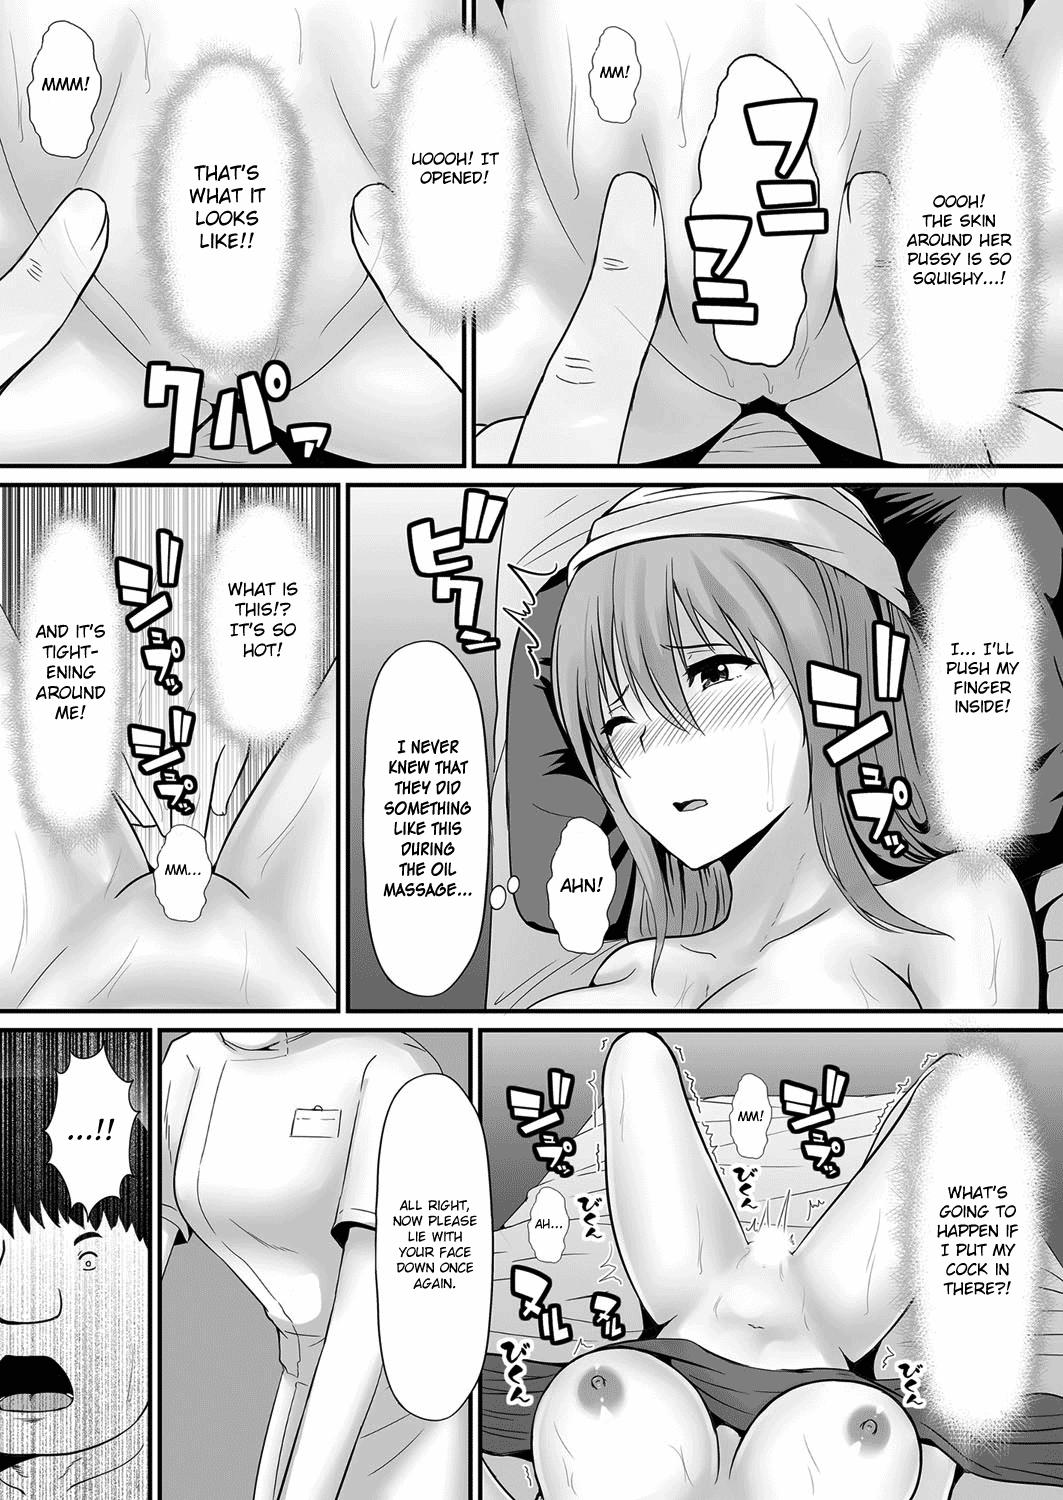 Girl Sucking Dick Ecchi na Hatsumei de... Mechakucha Sex Shitemita! 1 | I Used Perverted Inventions... To Have Crazy Sex! 1 Amateur Free Porn - Page 11